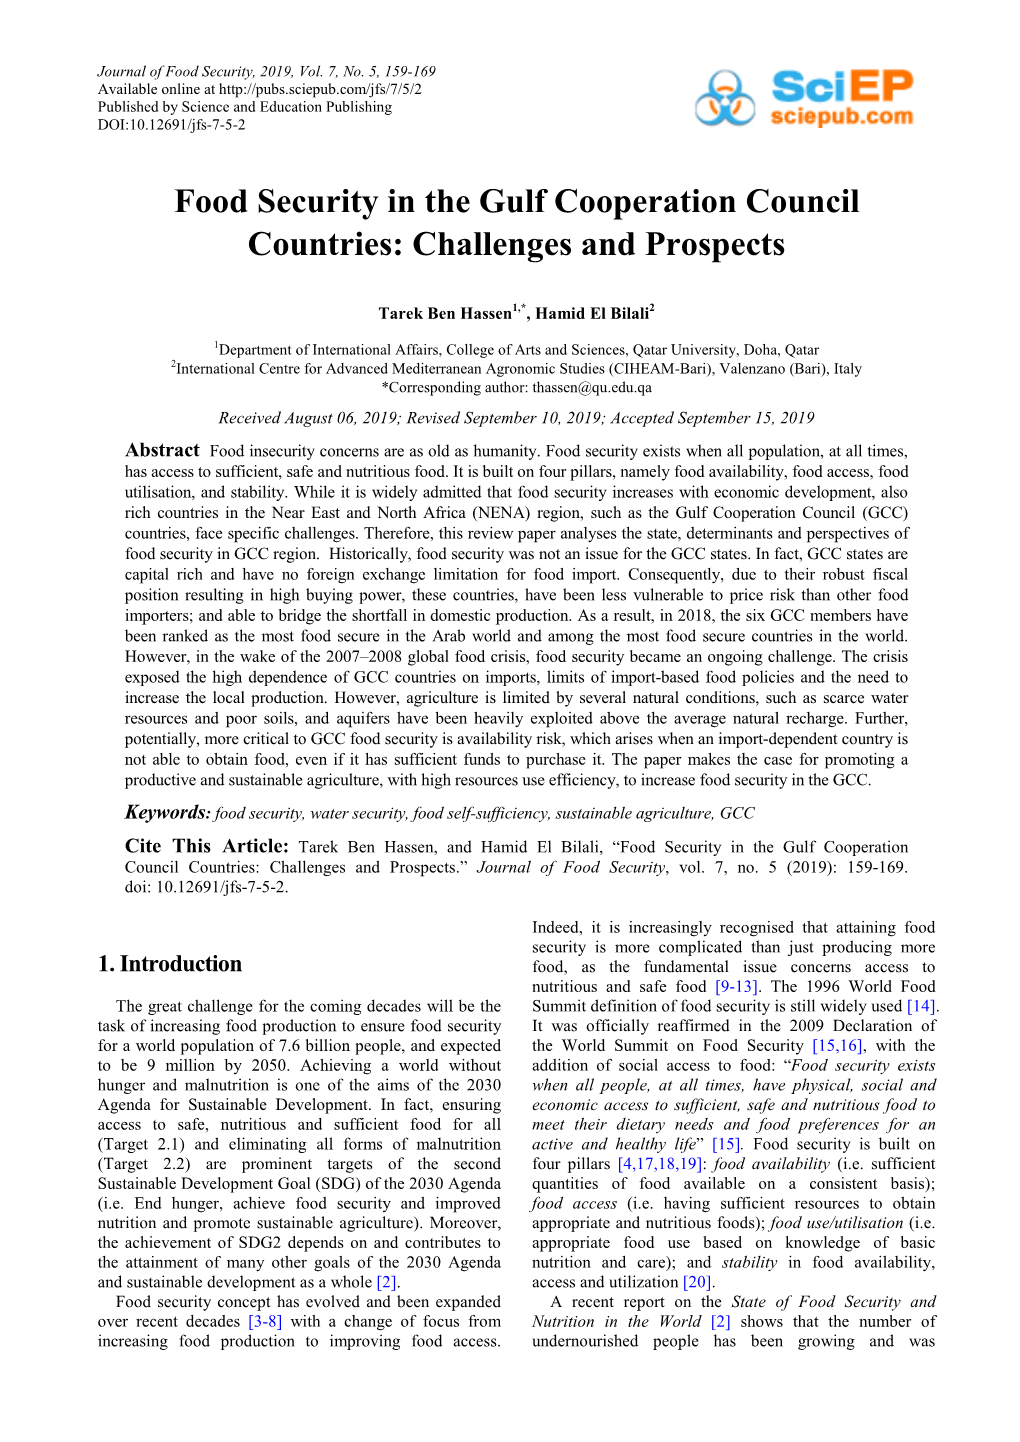 Food Security in the Gulf Cooperation Council Countries: Challenges and Prospects